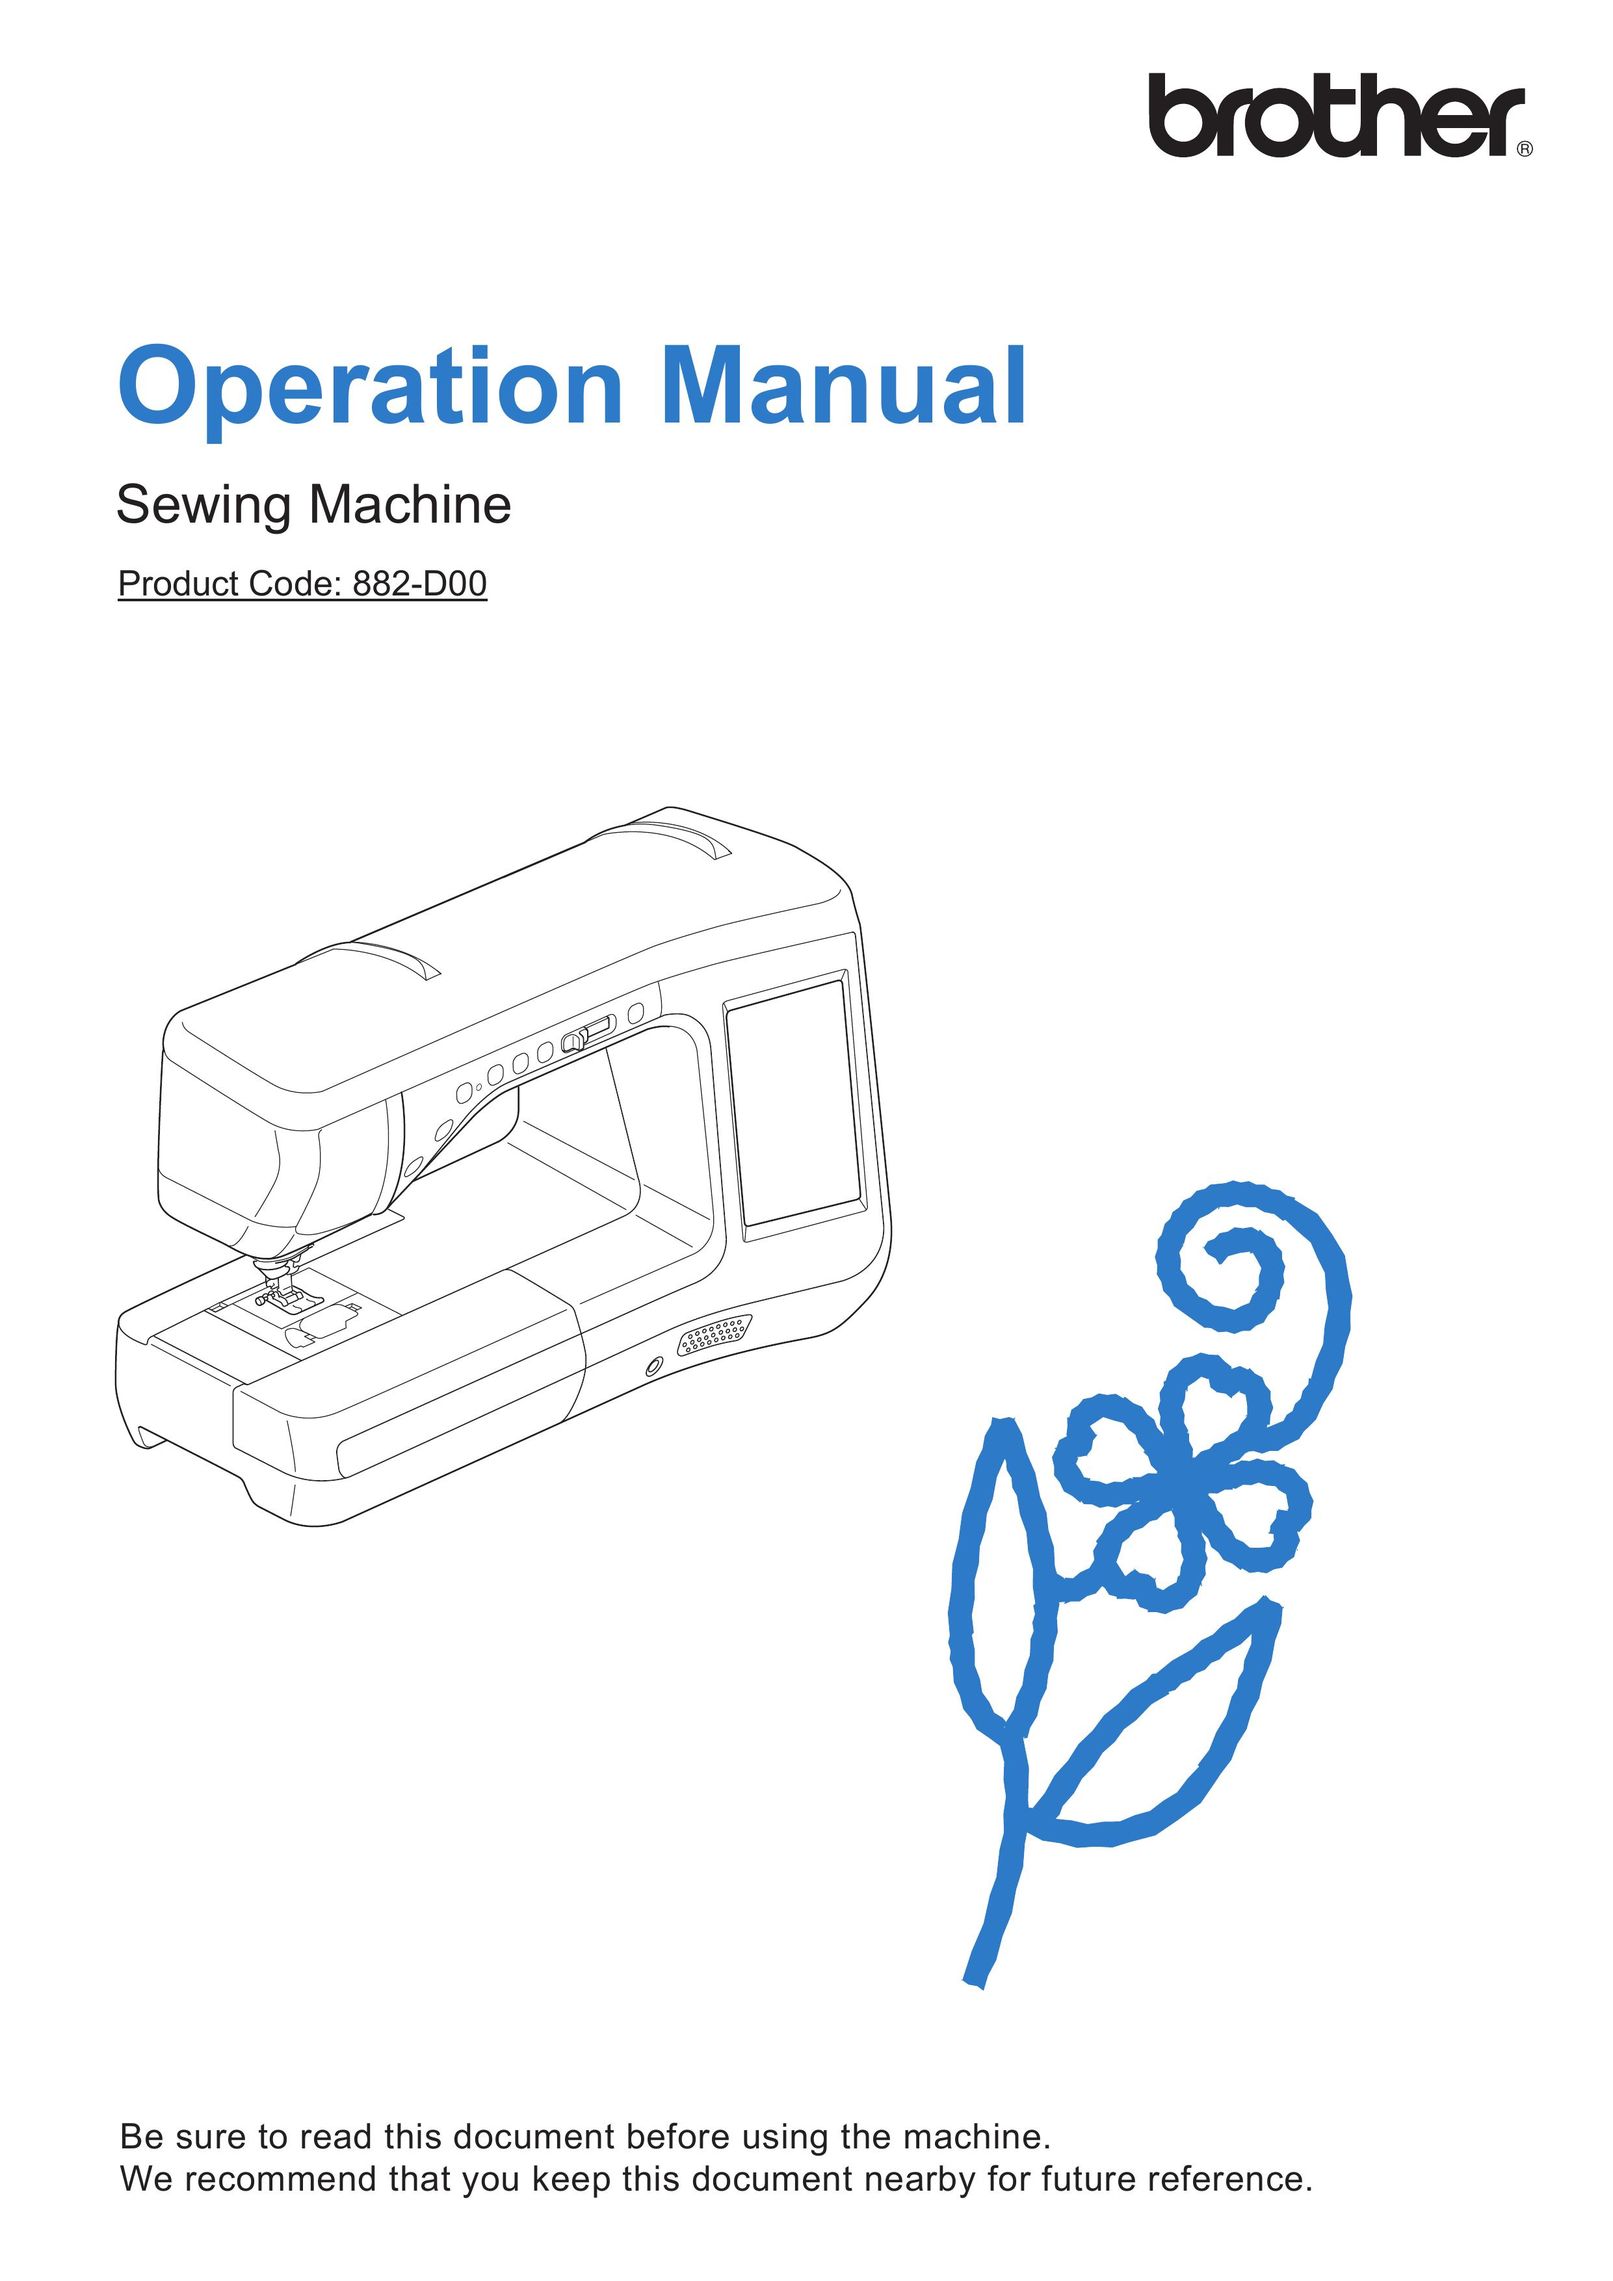 Brother 882-D00 Sewing Machine User Manual